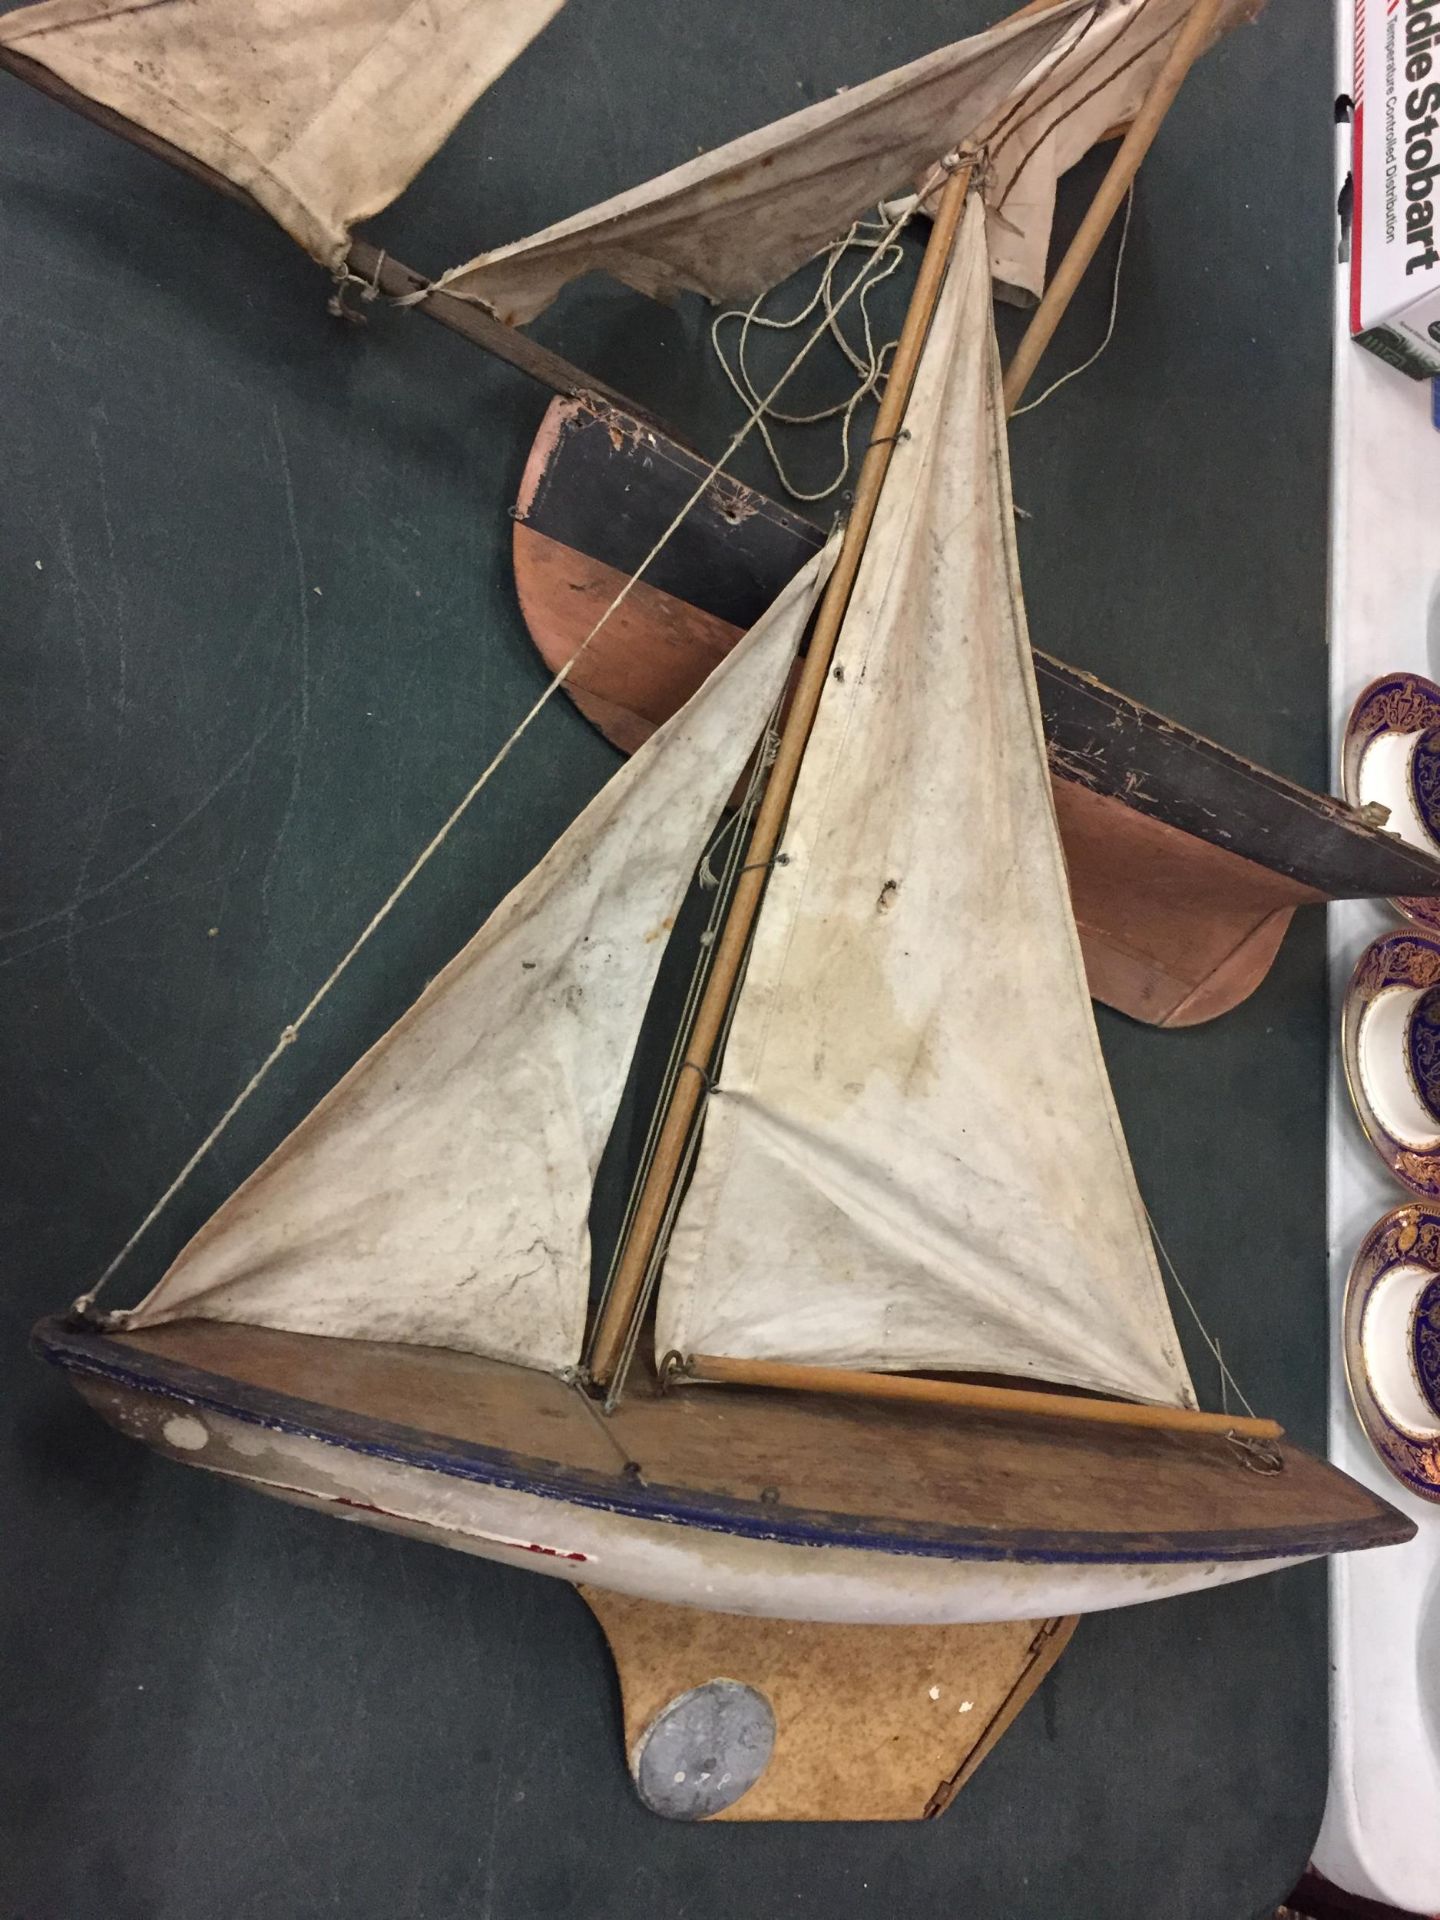 TWO VINTAGE LARGE WOODEN SAILING SHIPS 63CM HIGH - Image 2 of 3